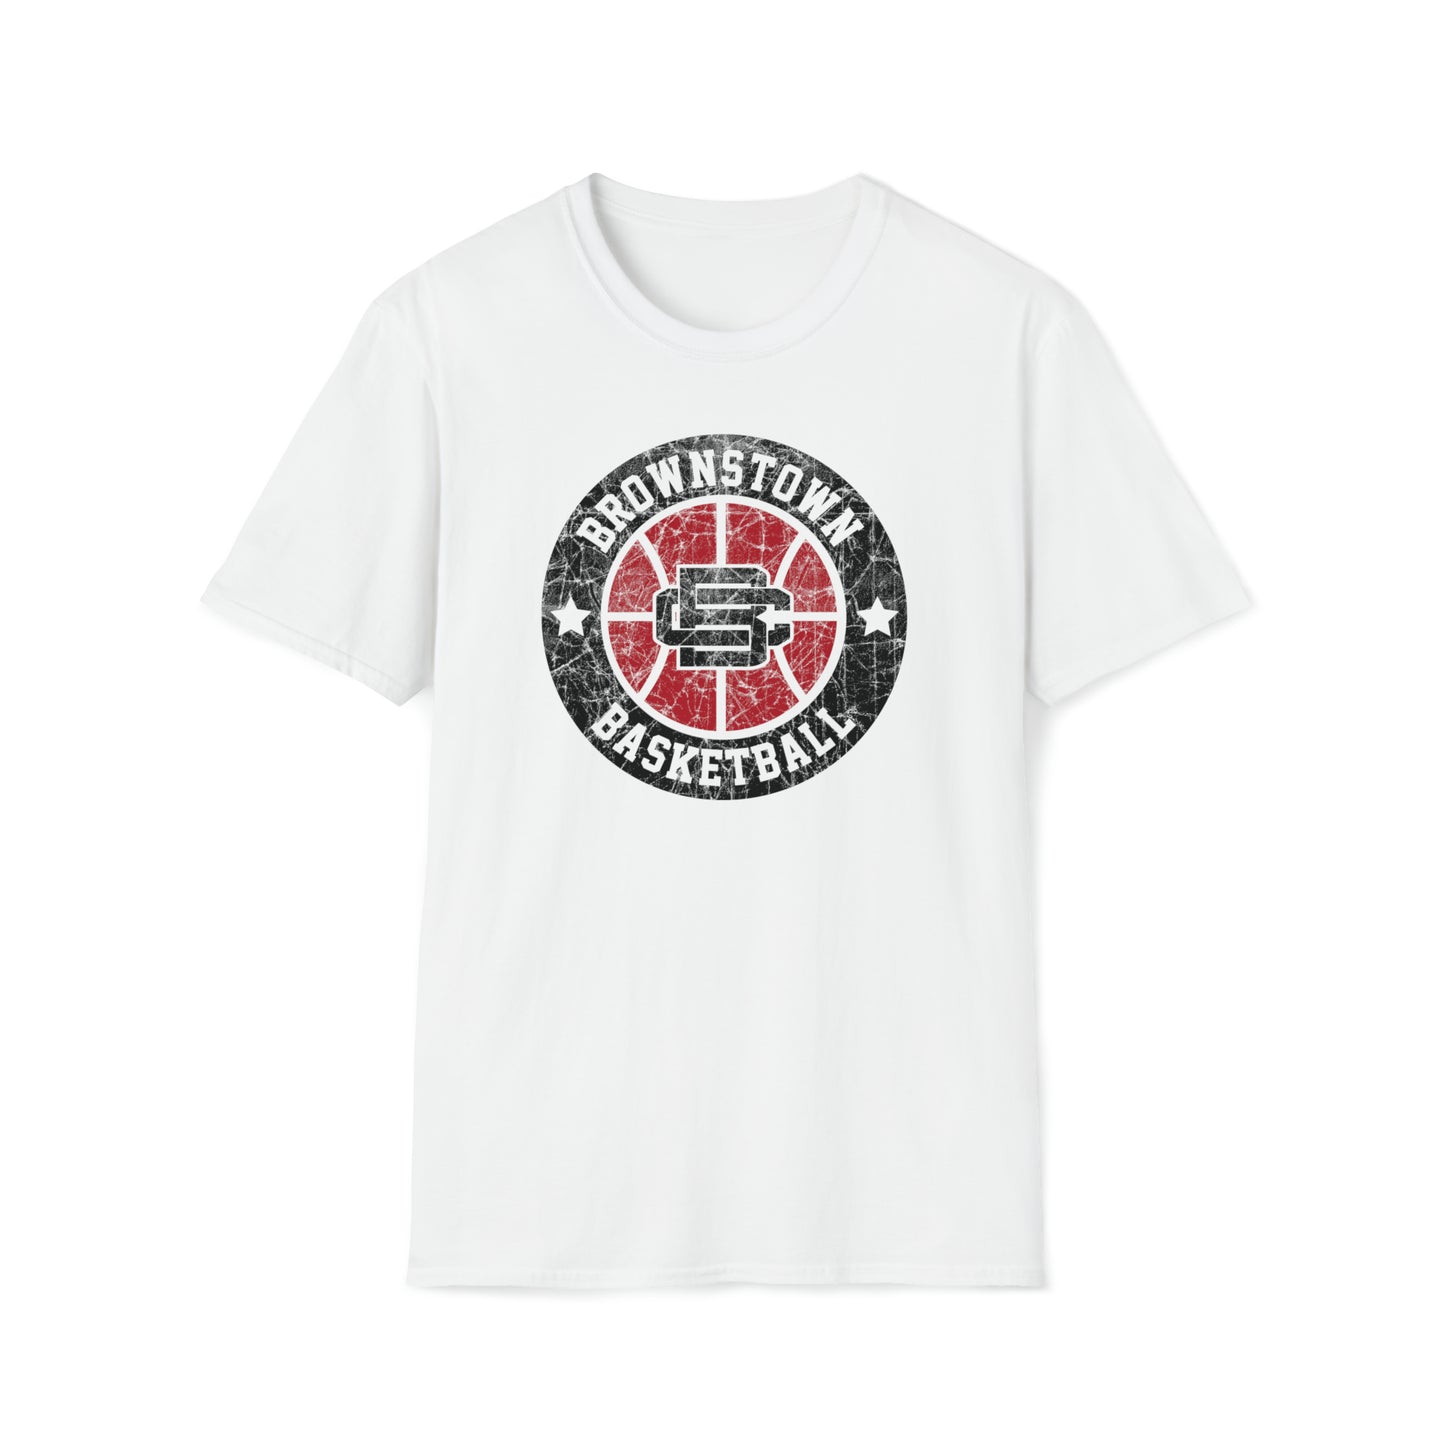 Vintage Brownstown Basketball Unisex Softstyle T-Shirt